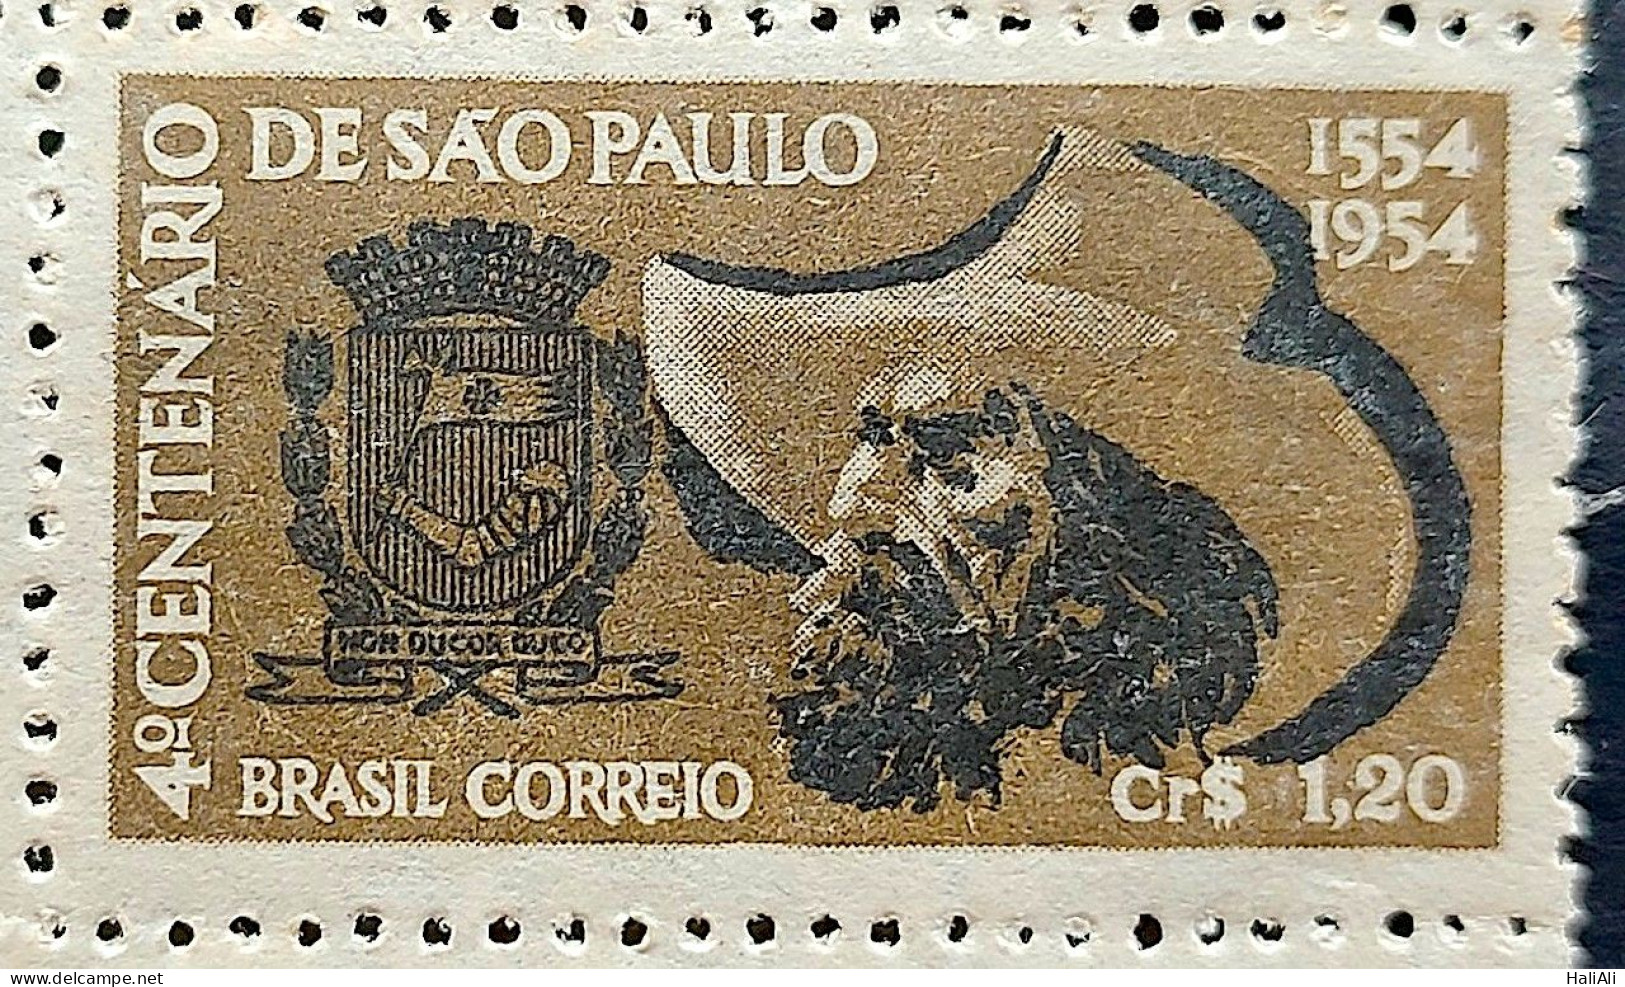 C 291 Brazil Stamp 4 Centenary Of São Paulo Coat Of Arms Hat 1953 - Unused Stamps